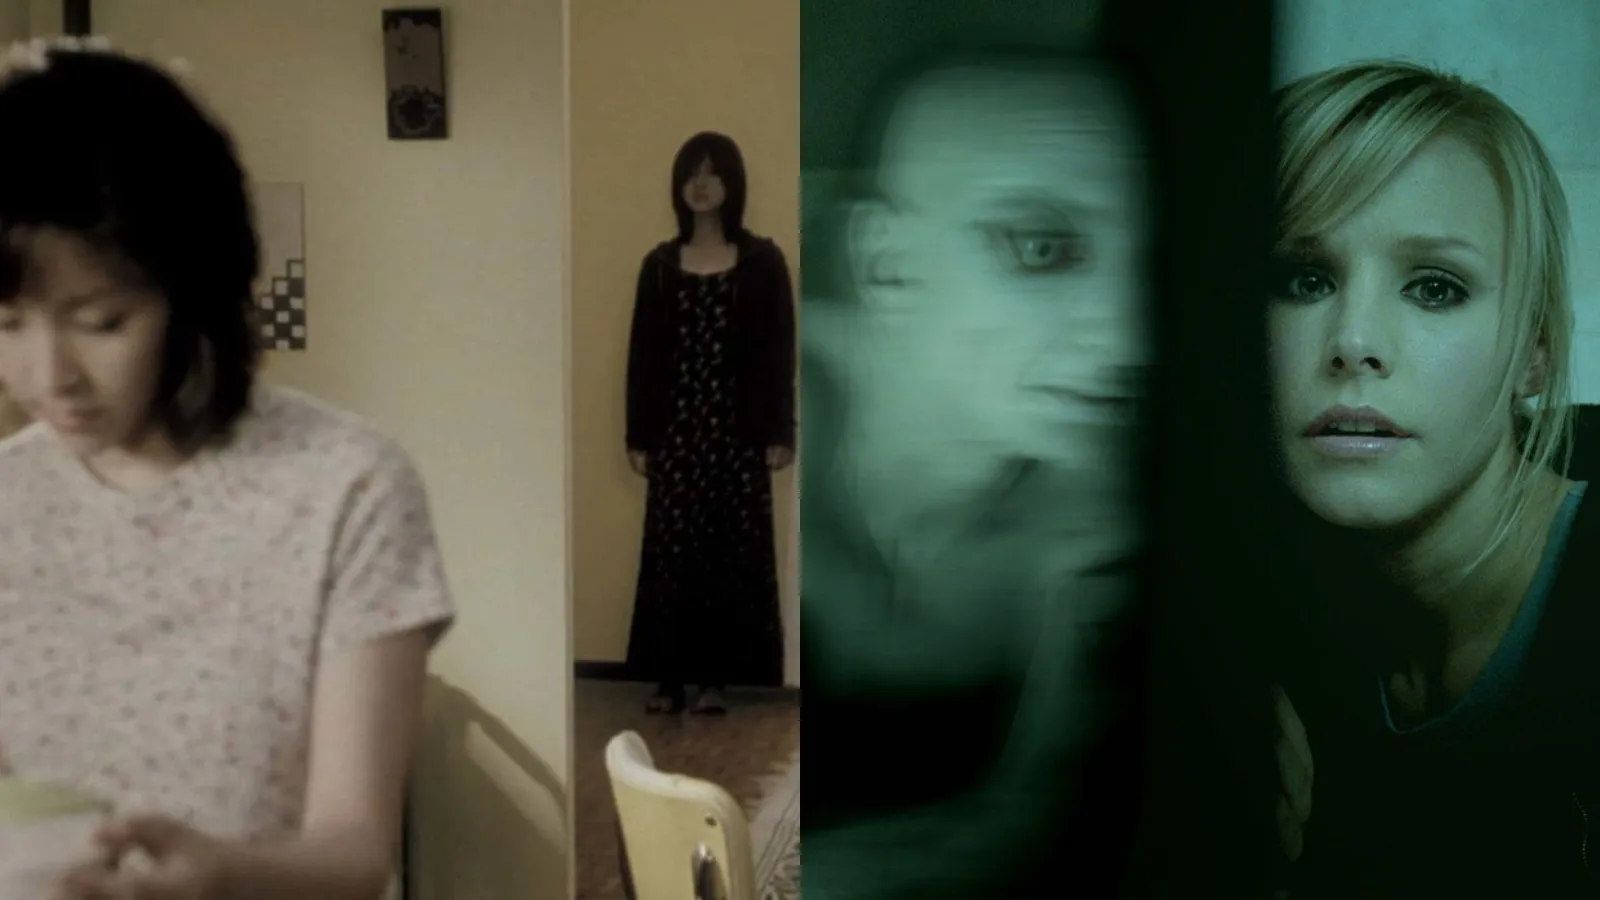 Screencaps from Pulse (2001) (left) and Pulse (2006) (right)